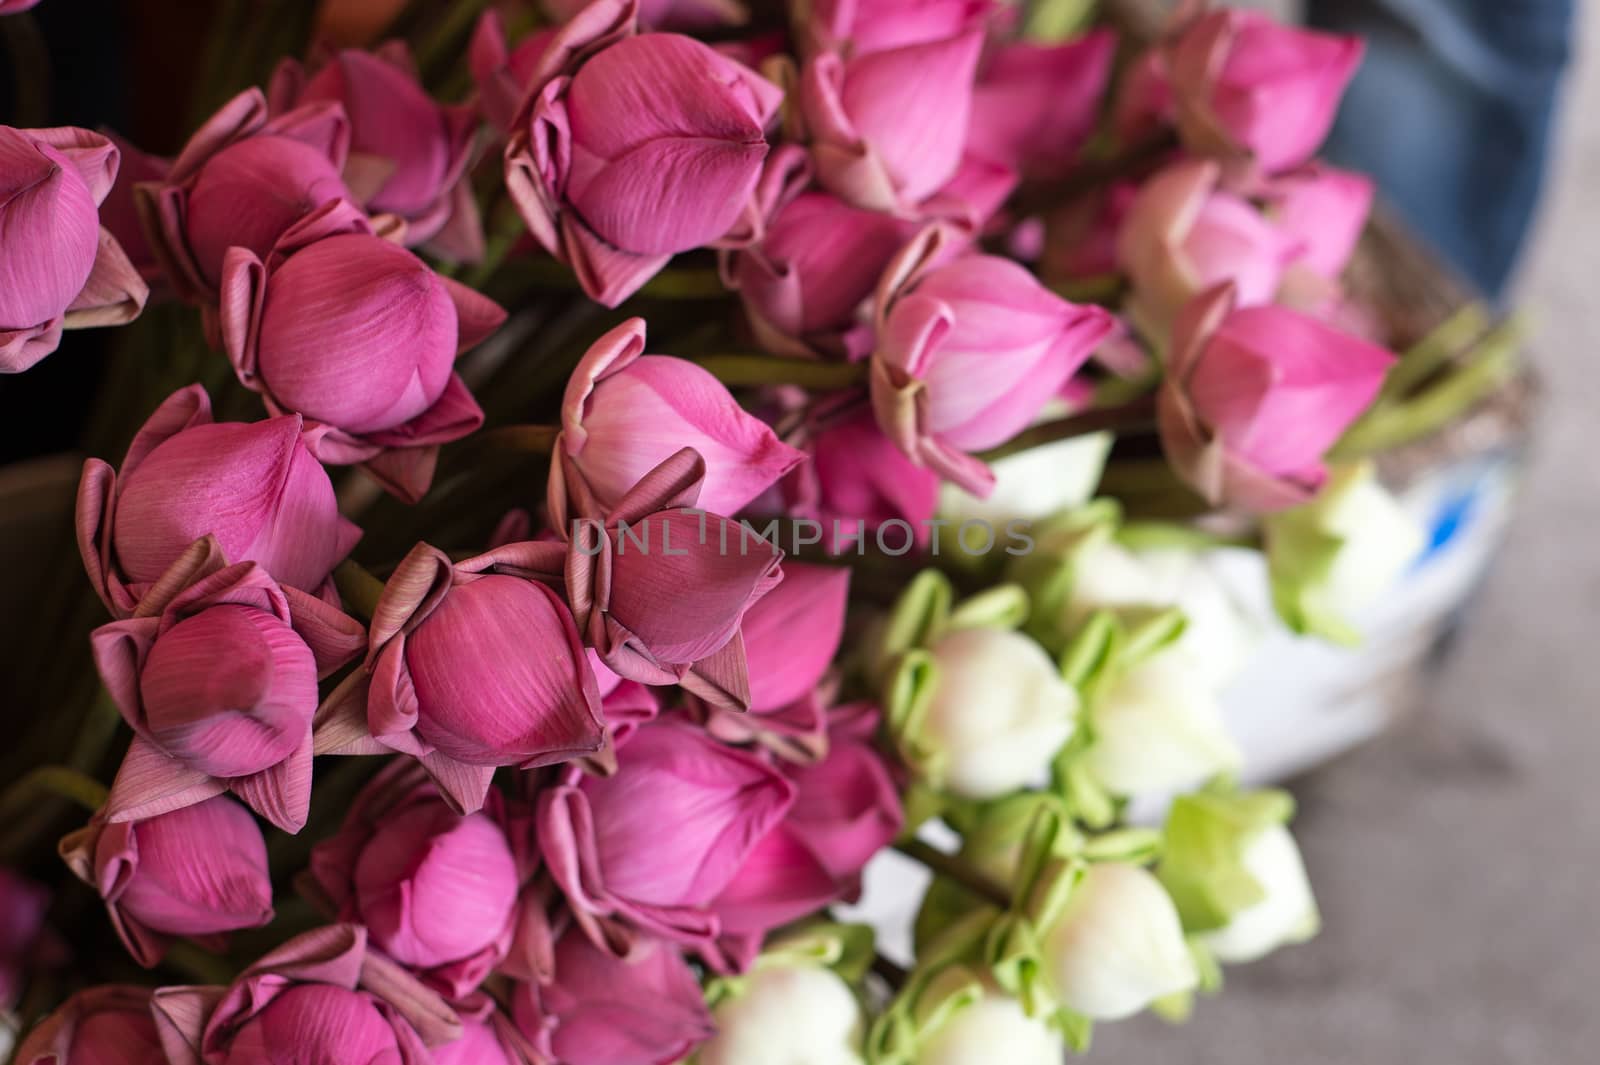 Phnom Penh, Cambodia in September 2nd 2014: Group of lotus flowers have been sold at Phsar Thmey market stall.